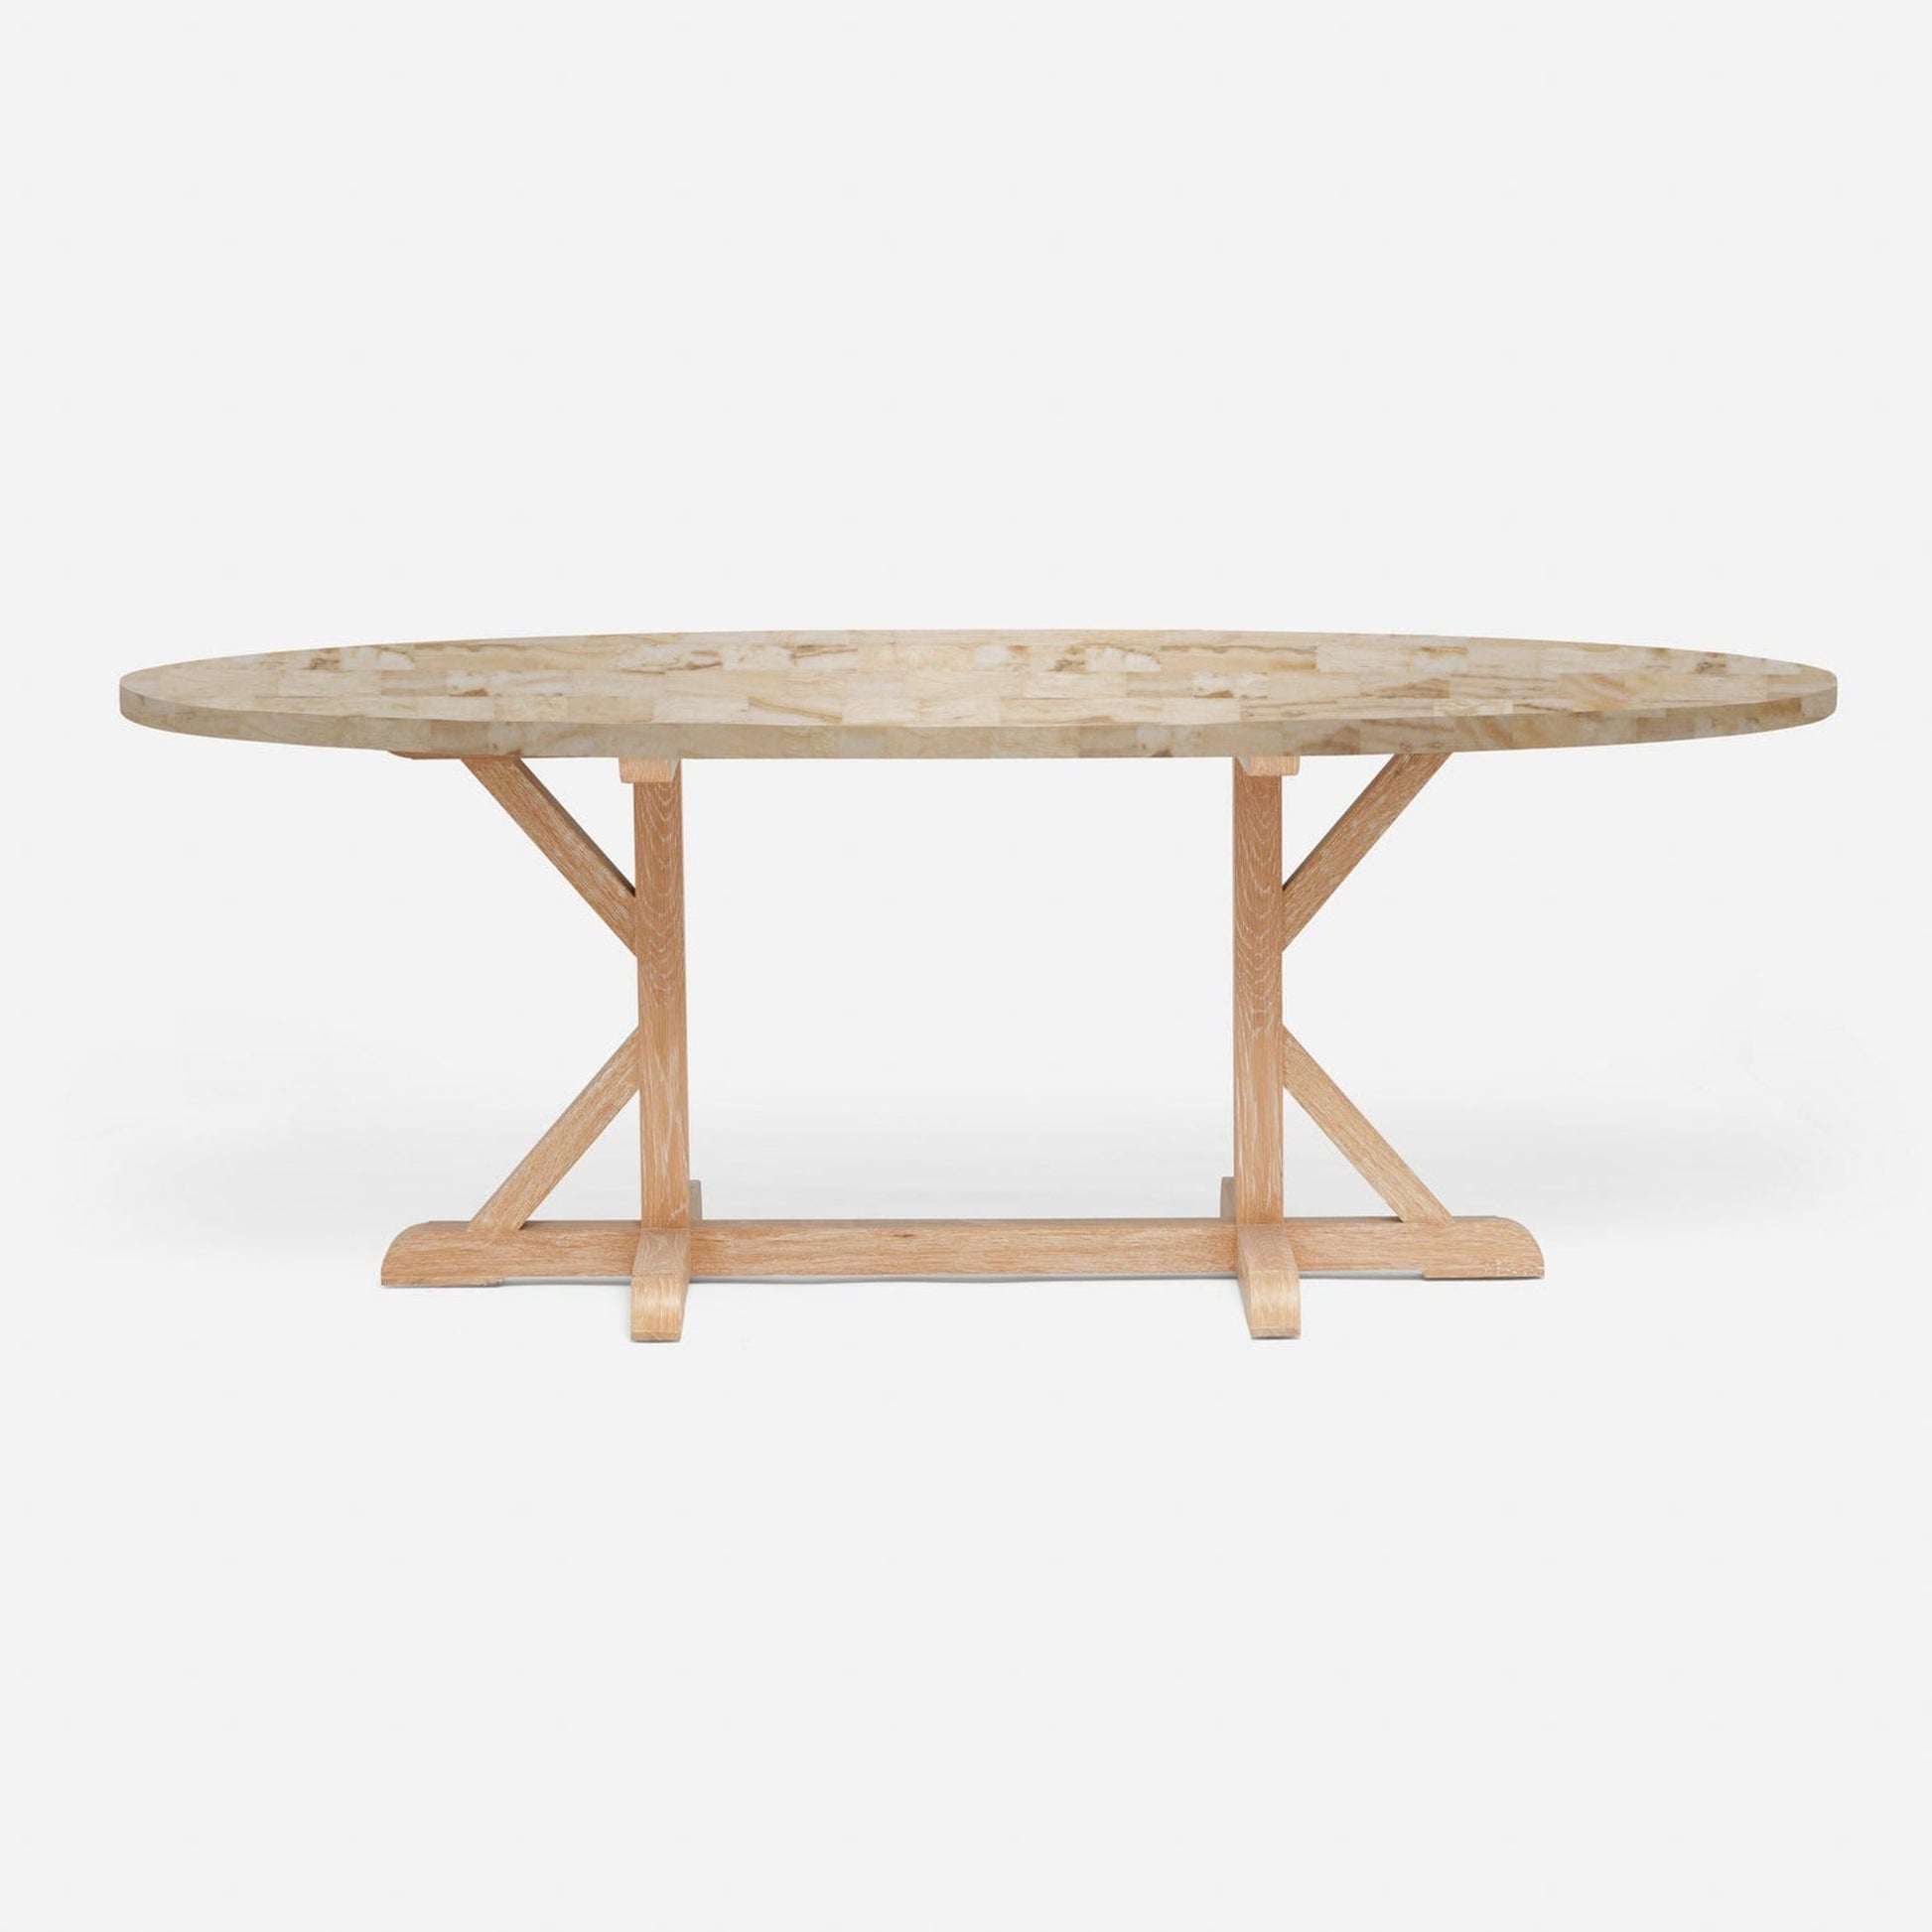 Made Goods Dane 84" x 42" x 30" White Cerused Oak Dinning Table With Oval Beige Crystal Stone Table Top